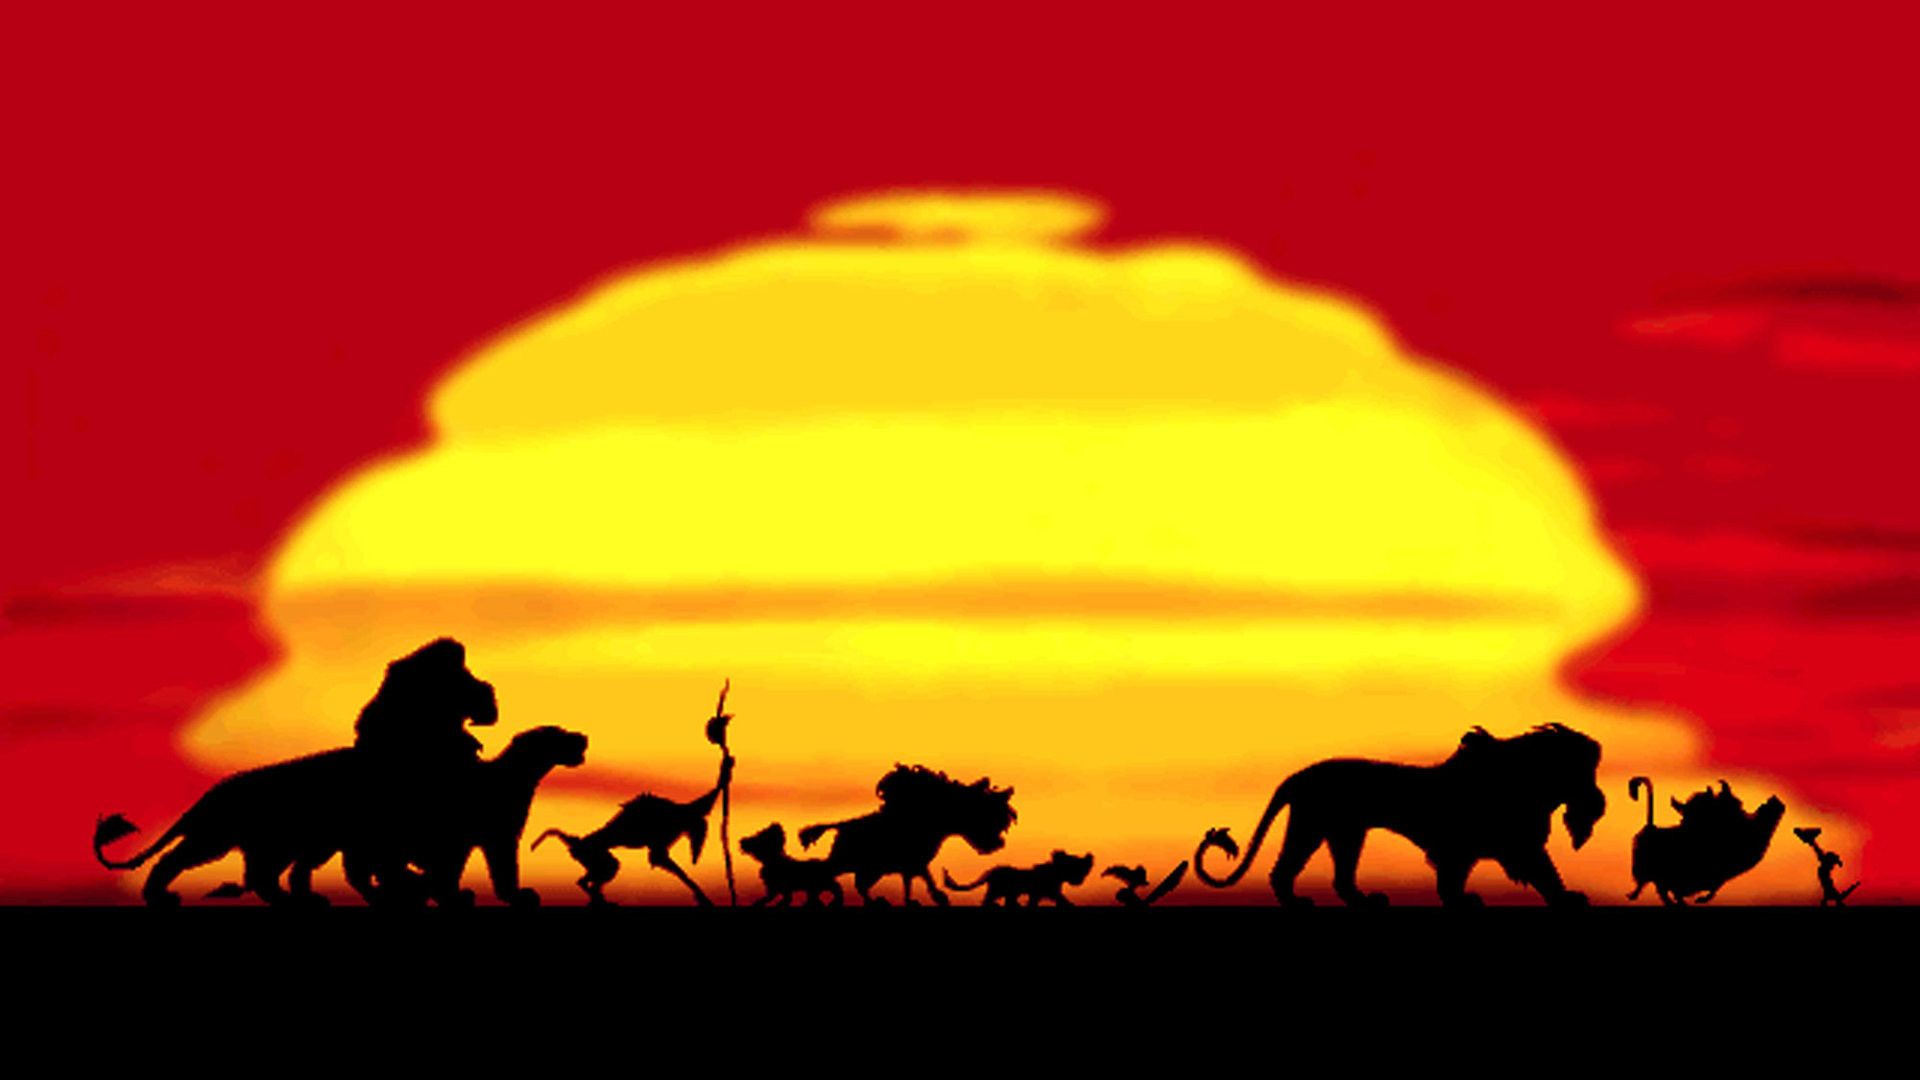 The Lion King Wallpaper for MacBook - Cartoons Wallpapers